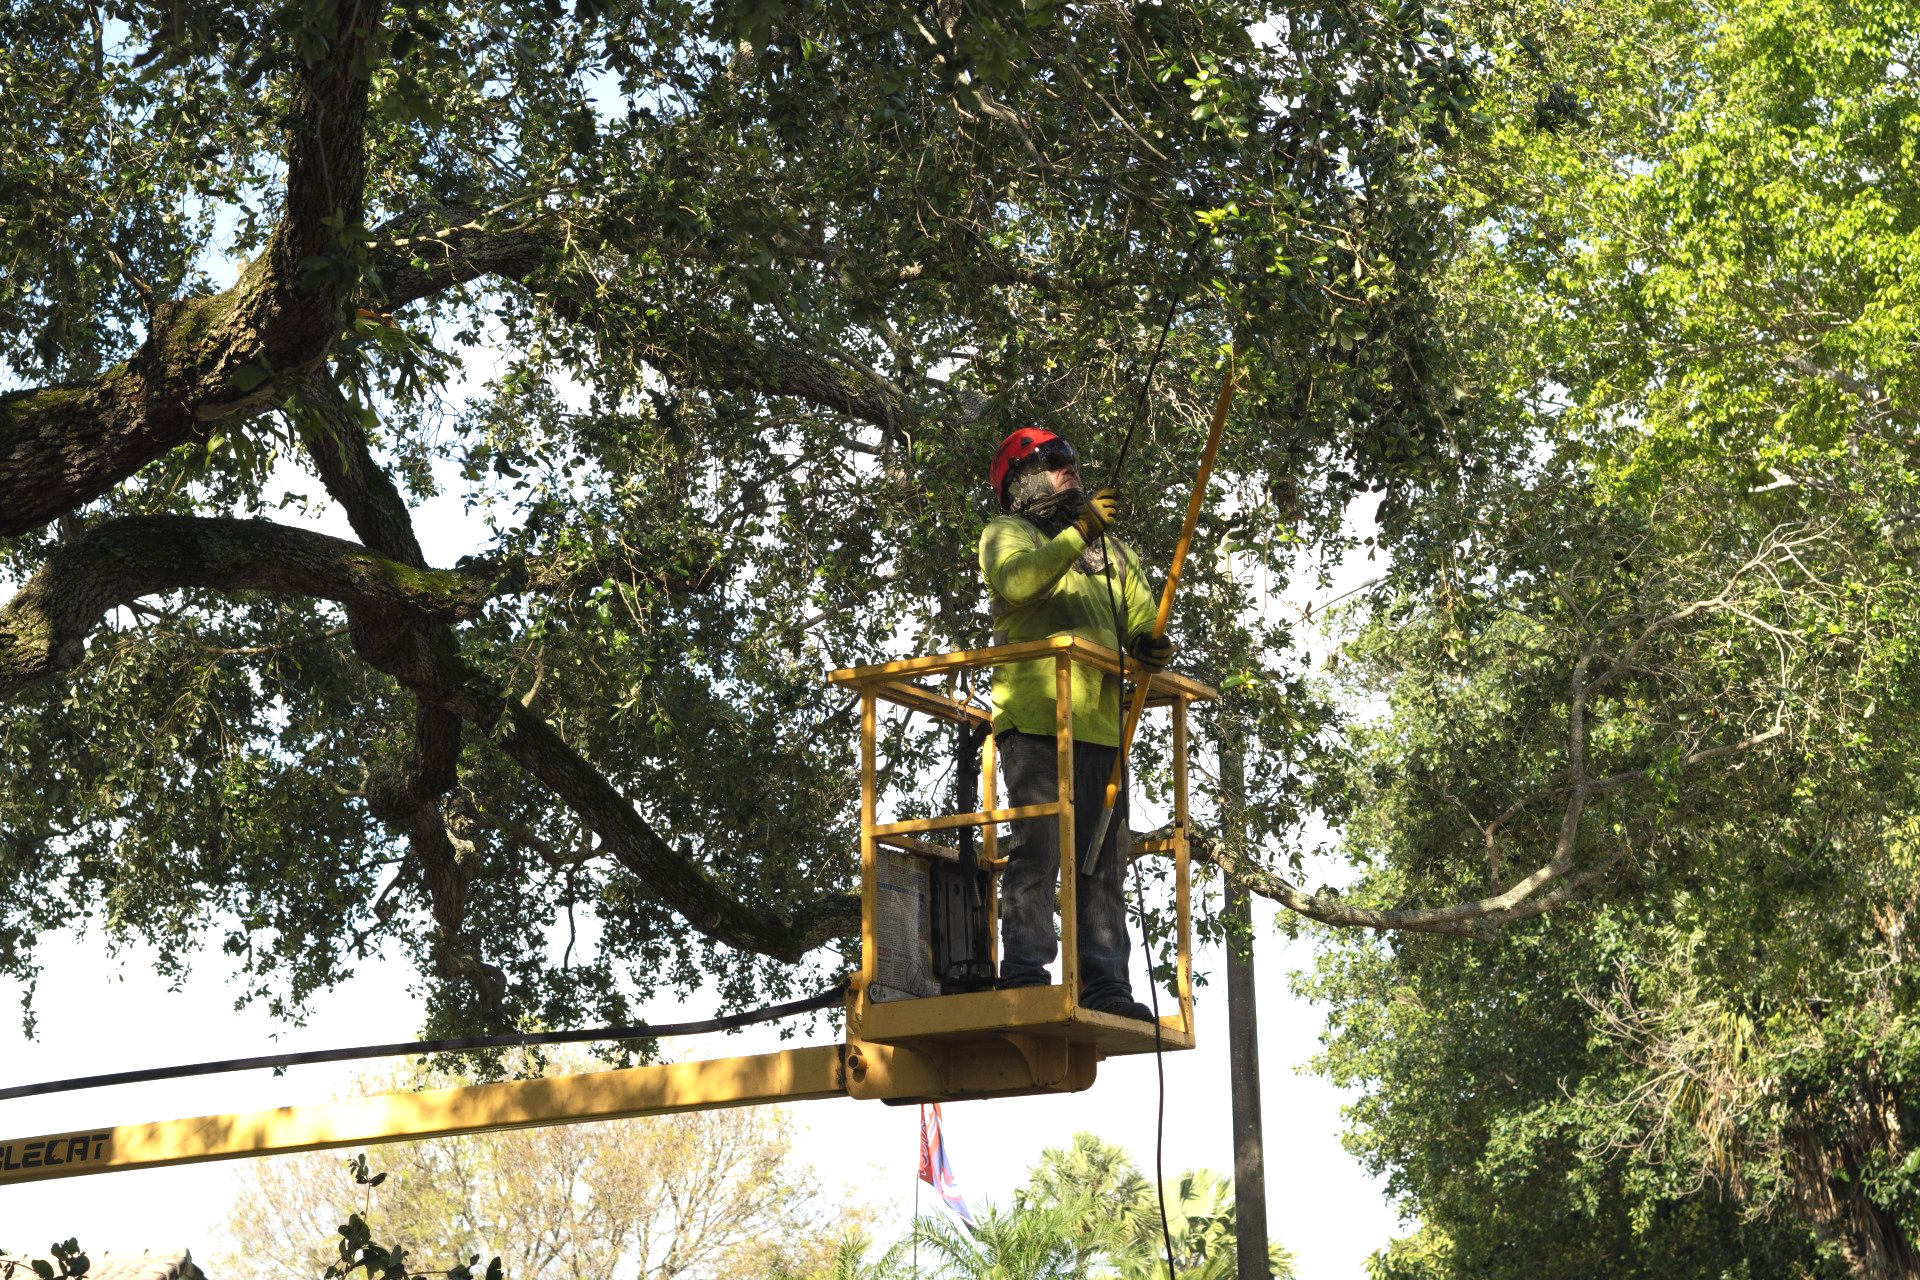 cherry picker being used to trim trees in fort lauderdale fl